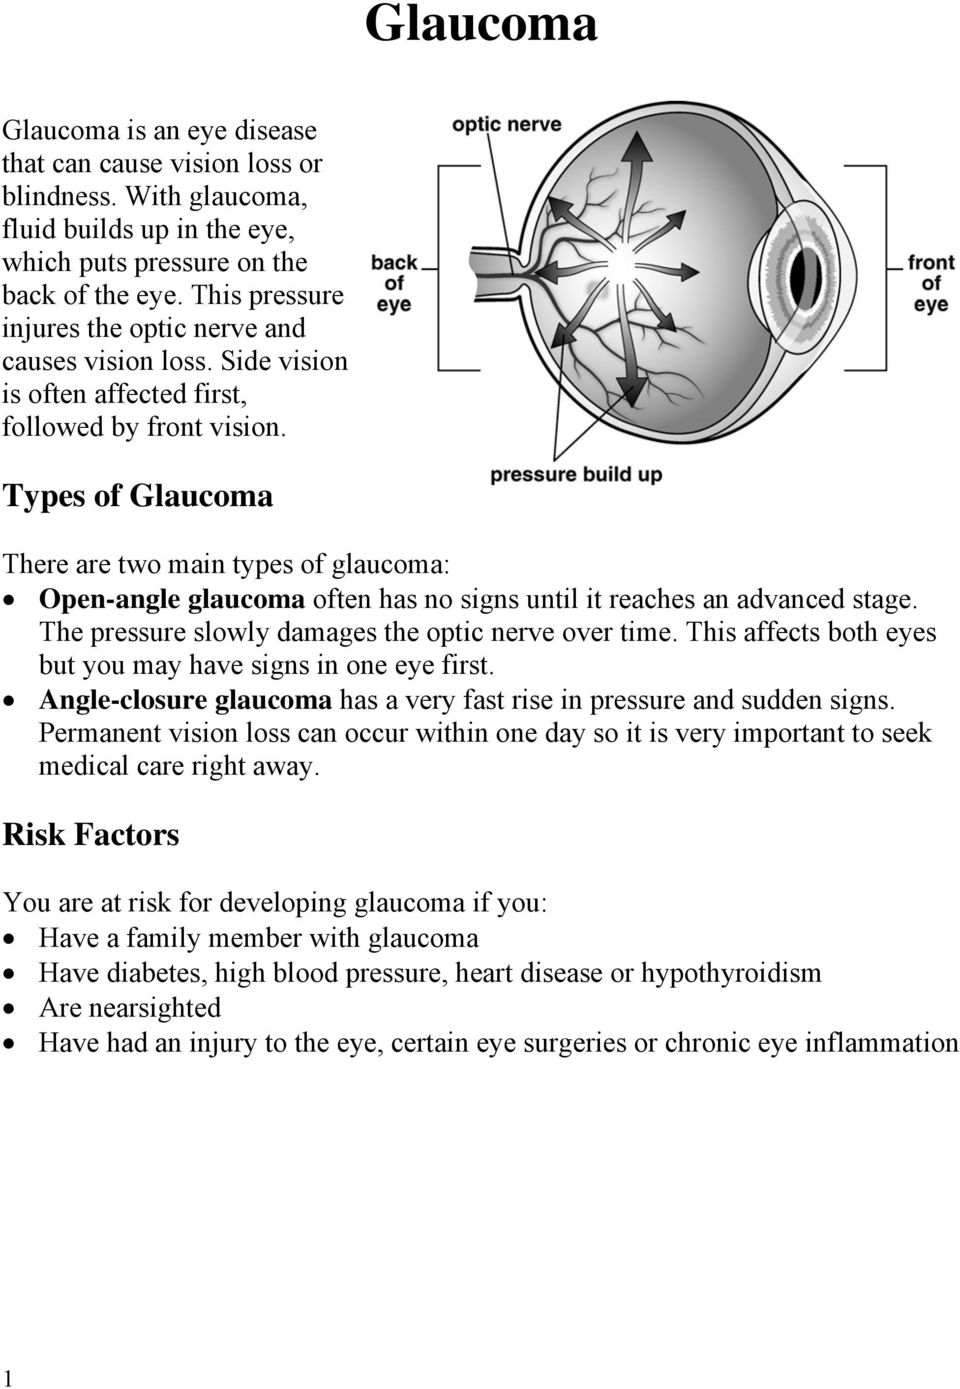 Types of Glaucoma There are two main types of glaucoma: Open-angle glaucoma often has no signs until it reaches an advanced stage. The pressure slowly damages the optic nerve over time.